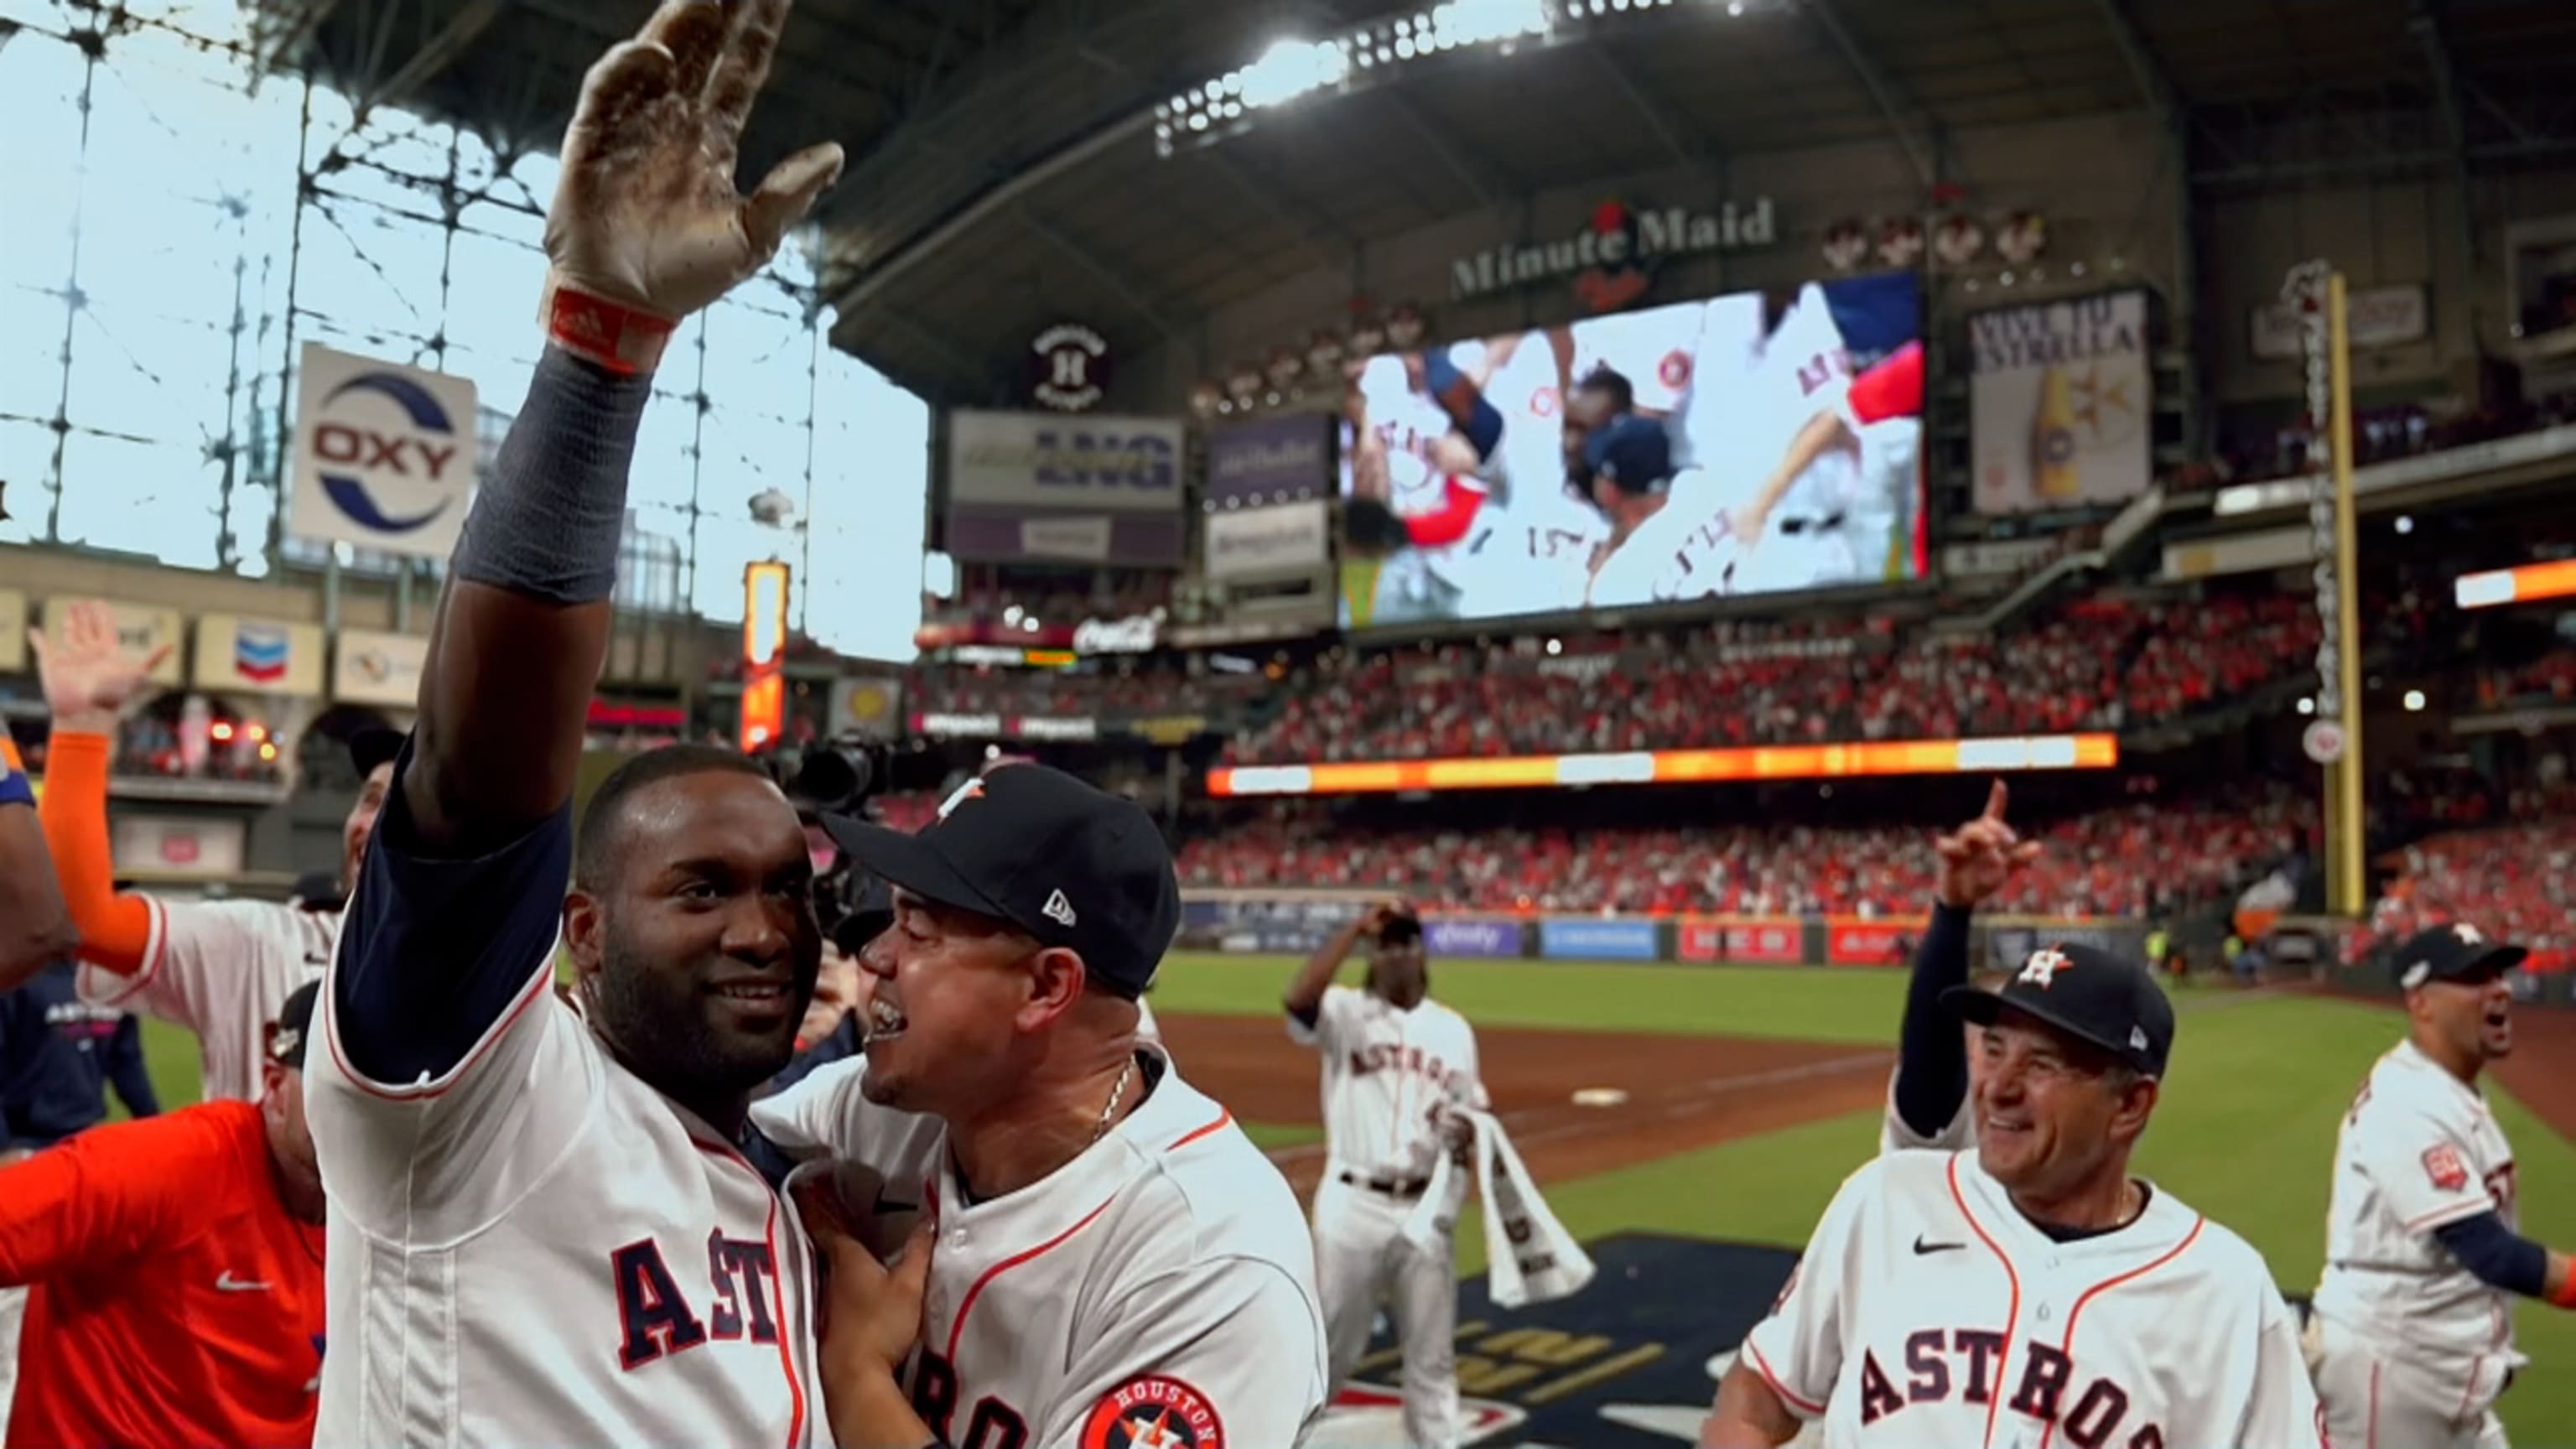 Minute Maid Park: a breakdown of the oldest major league sports